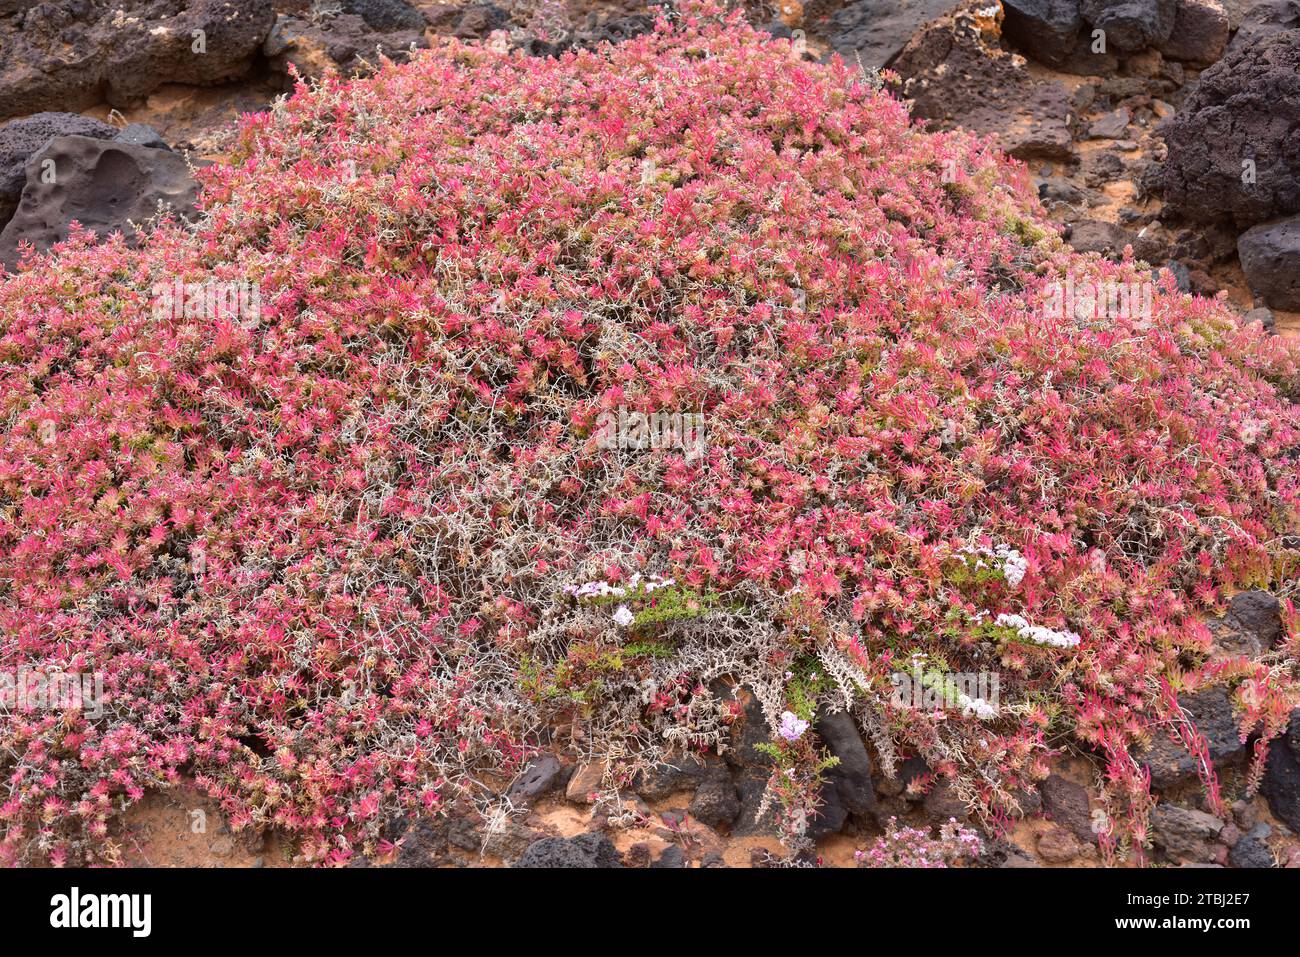 Suaeda ifniensis is a succulent shrub endemic to Morocco and Fuerteventura and Lanzarote Islands. This photo was taken in Lanzarote Island, Canary Isl Stock Photo